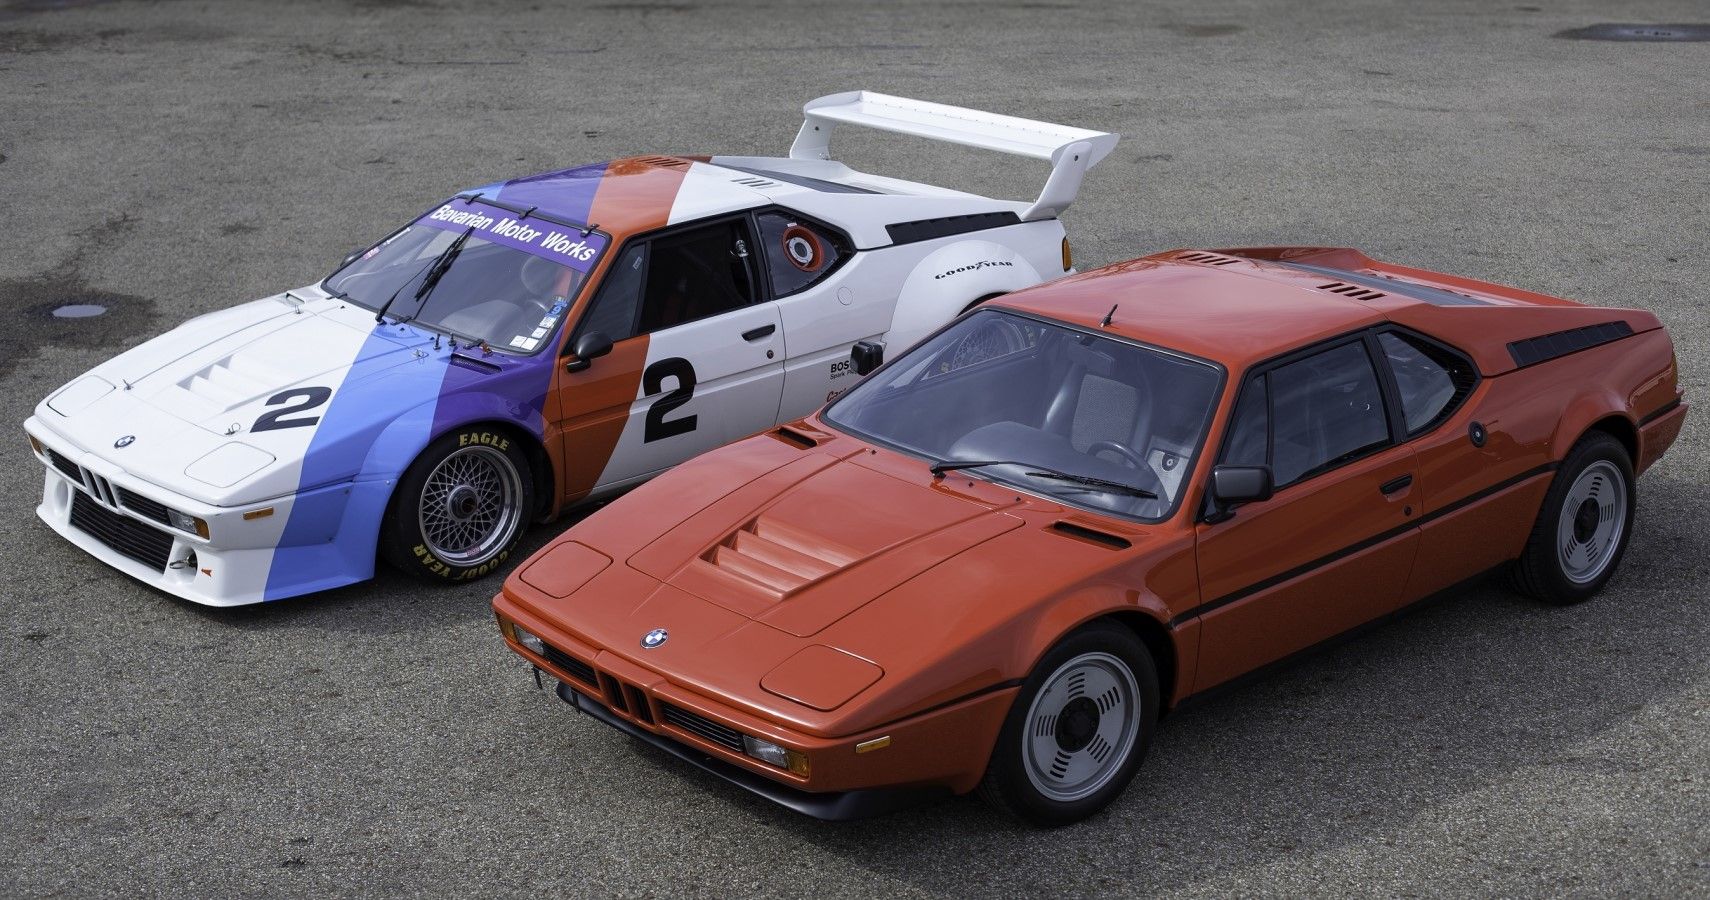 BMW M1 and M1 racecar front third quarter view